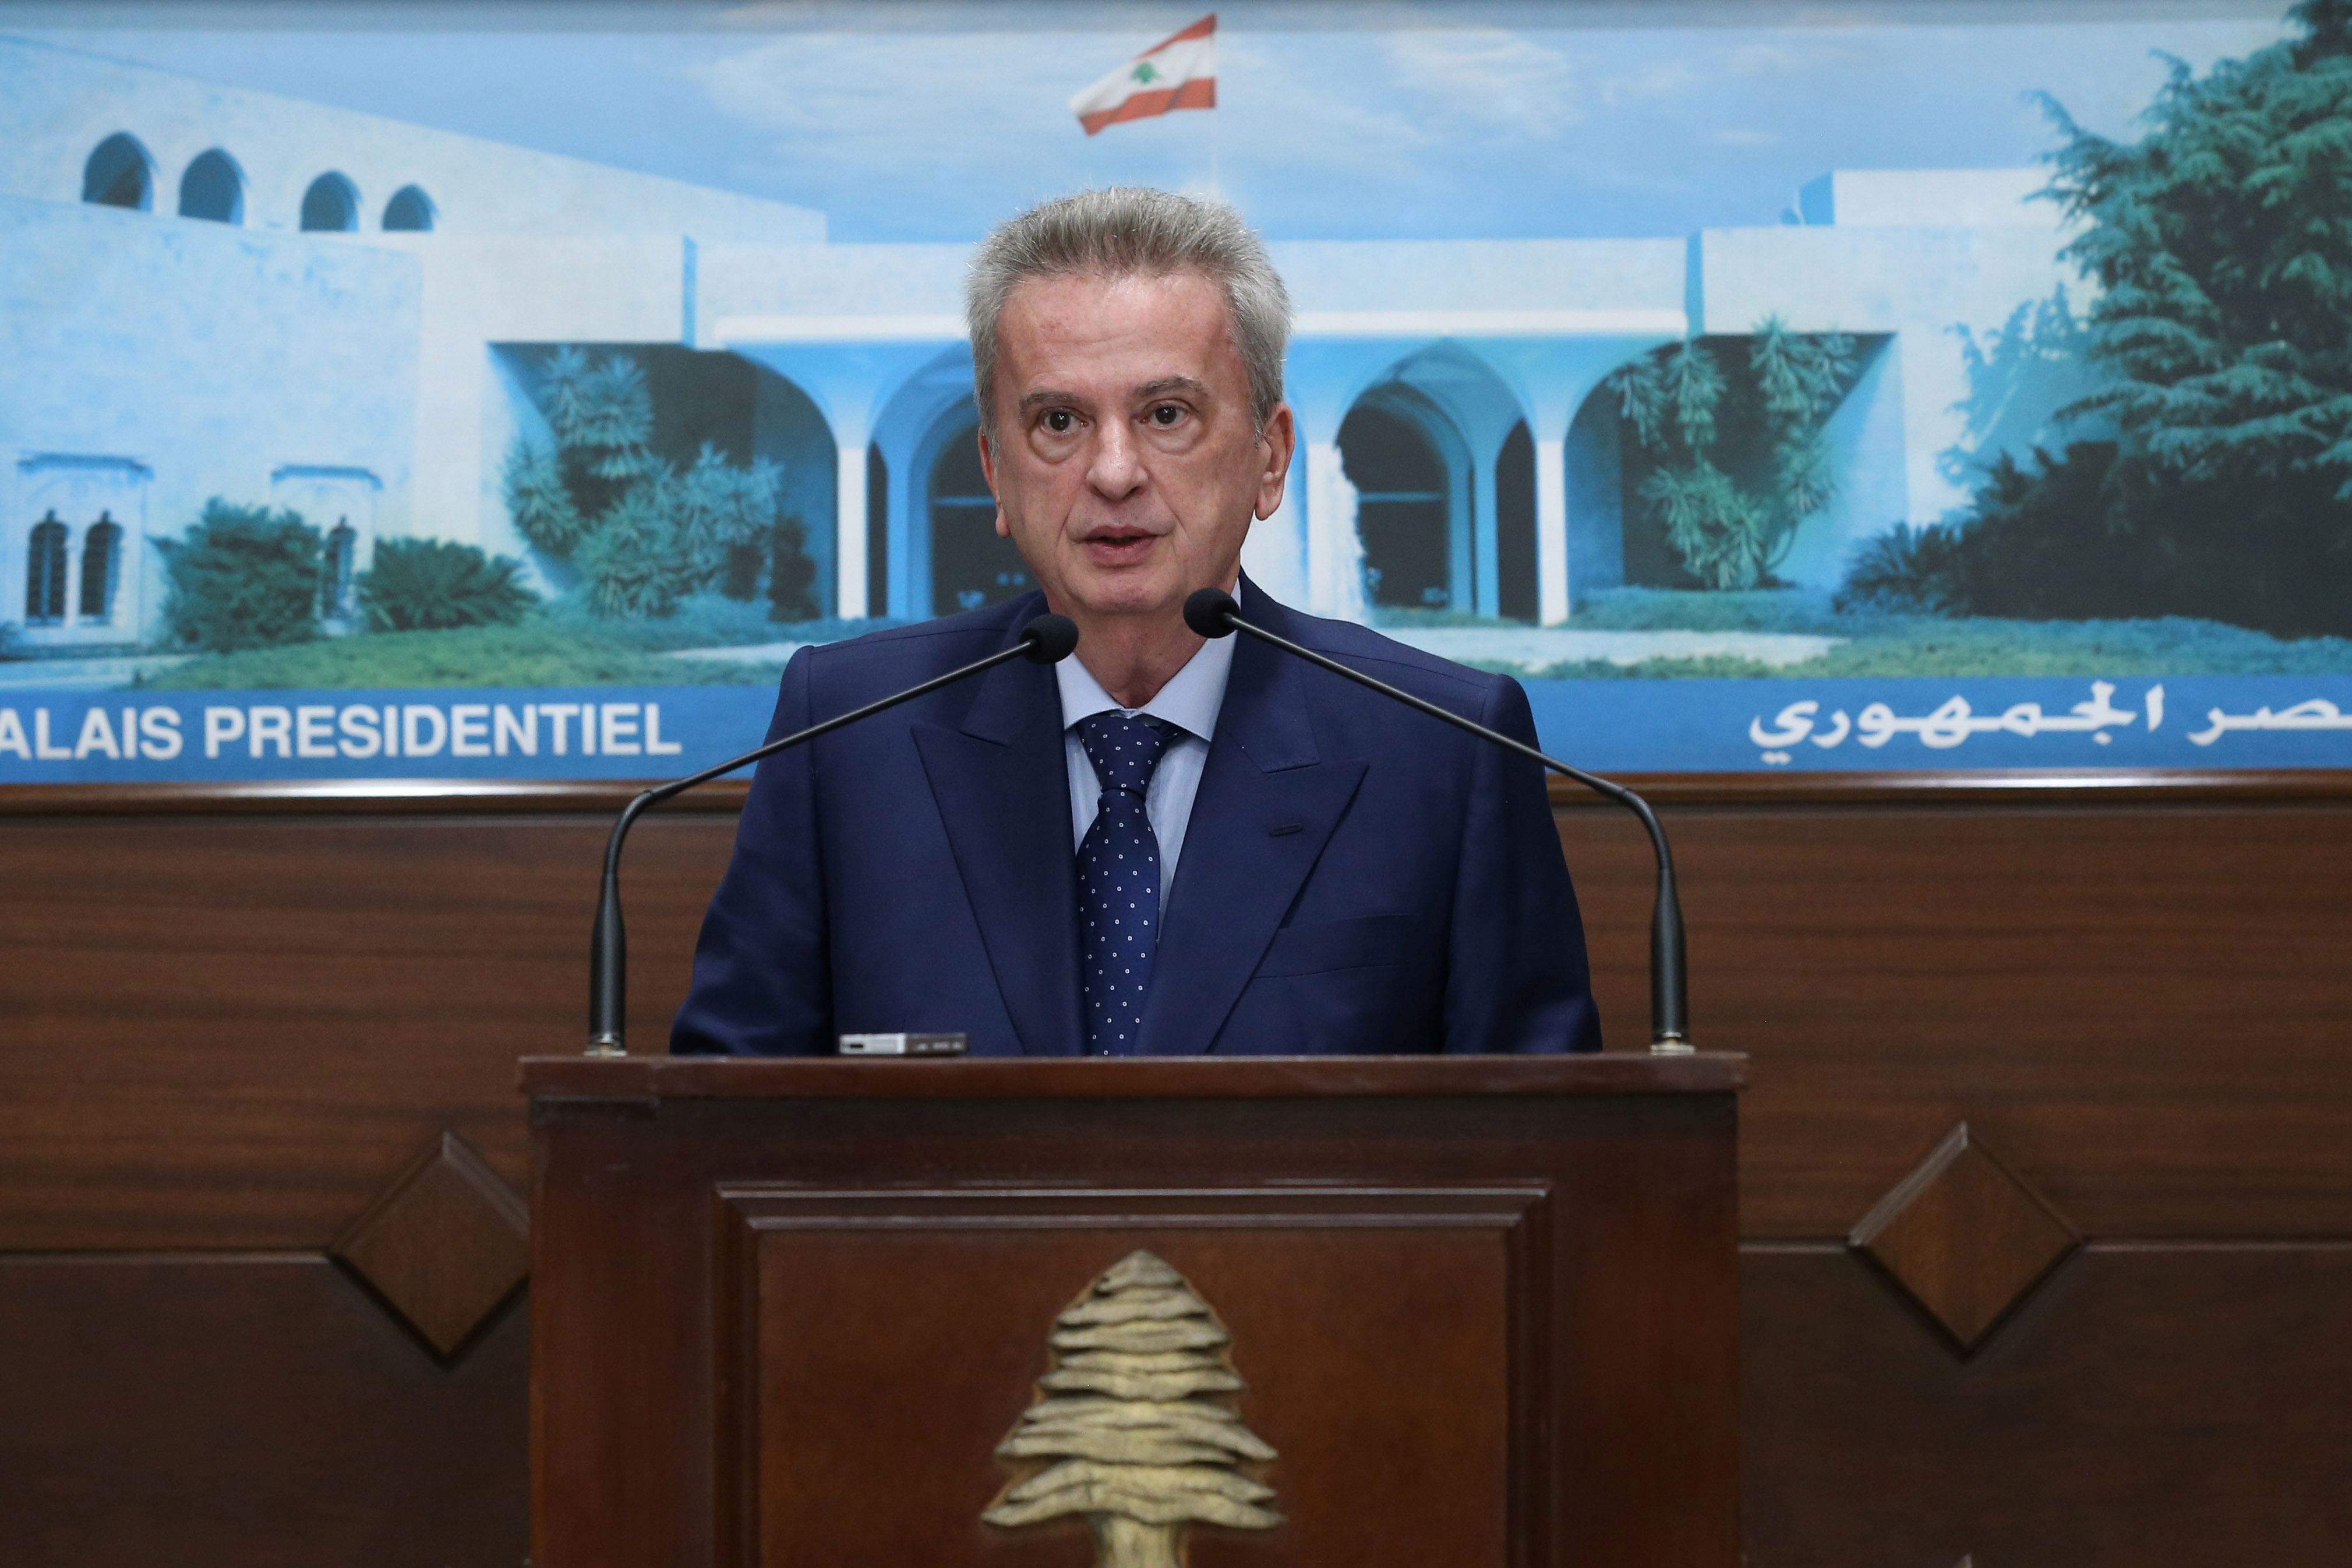 Lebanon's Central Bank Governor Riad Salameh speaks after meeting with President Michel Aoun at the presidential palace in Baabda